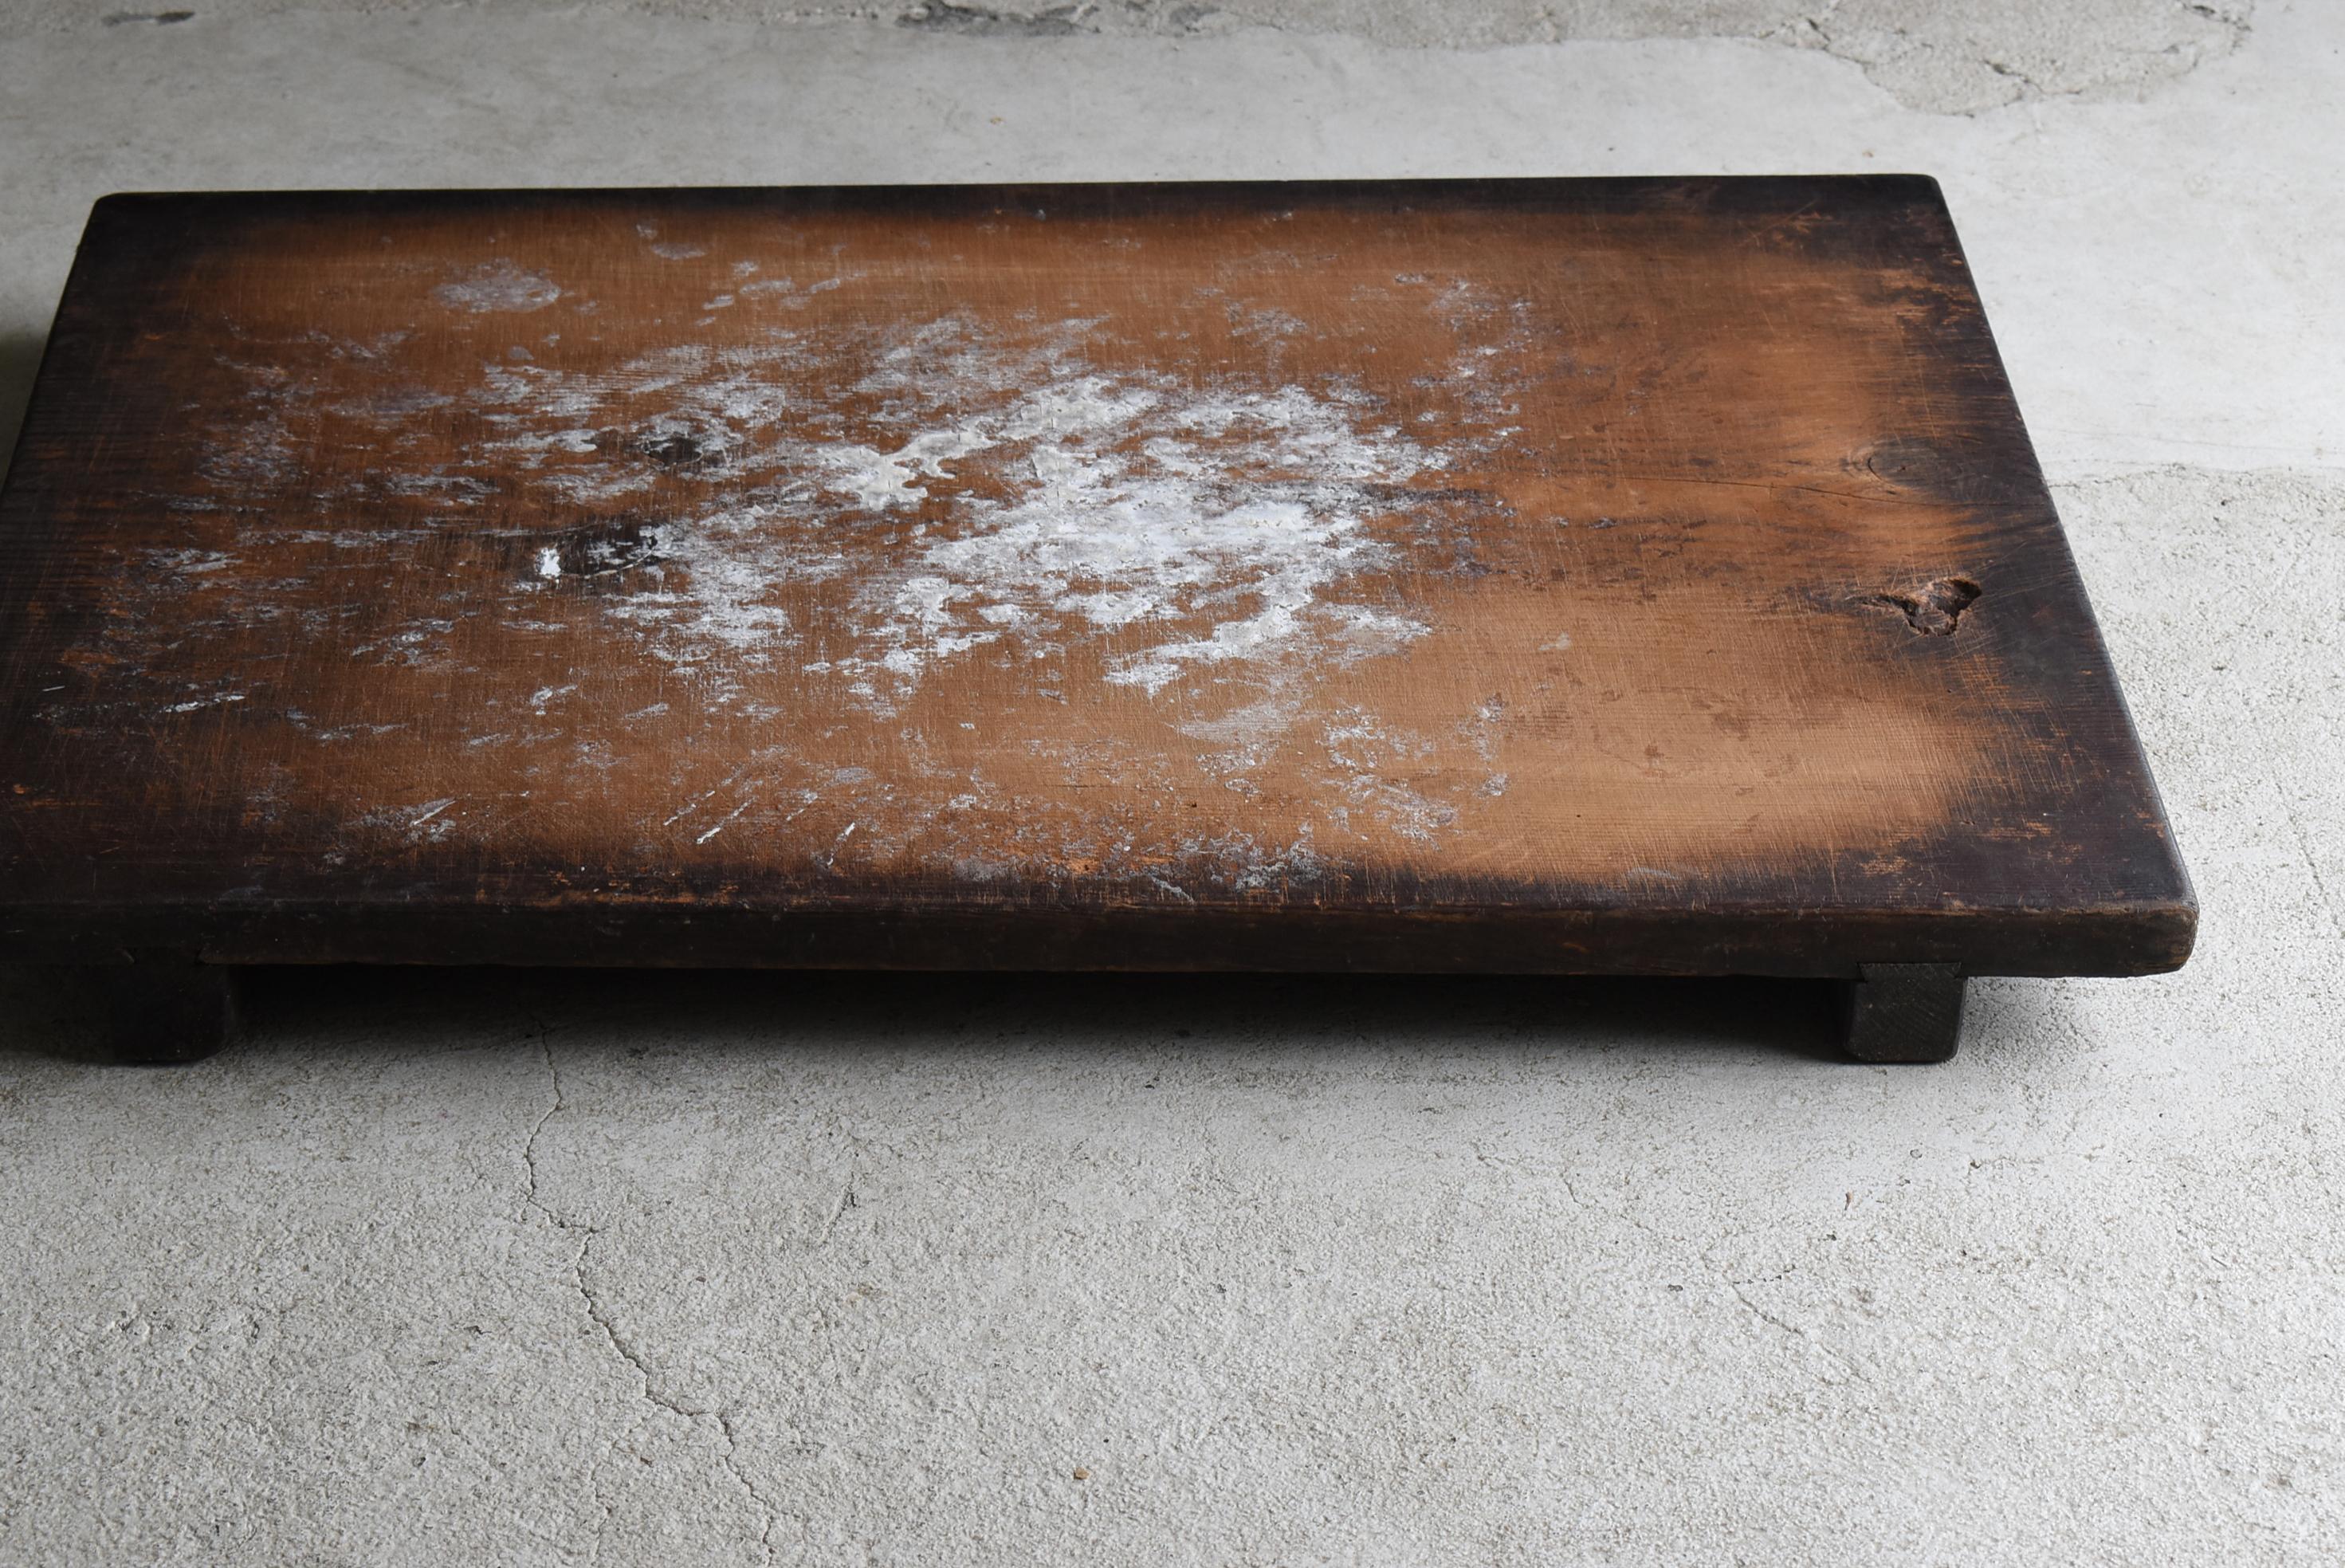 Japanese Antique Wooden Board 1860s-1900s / Abstract Art Low Table Wabisabi 1